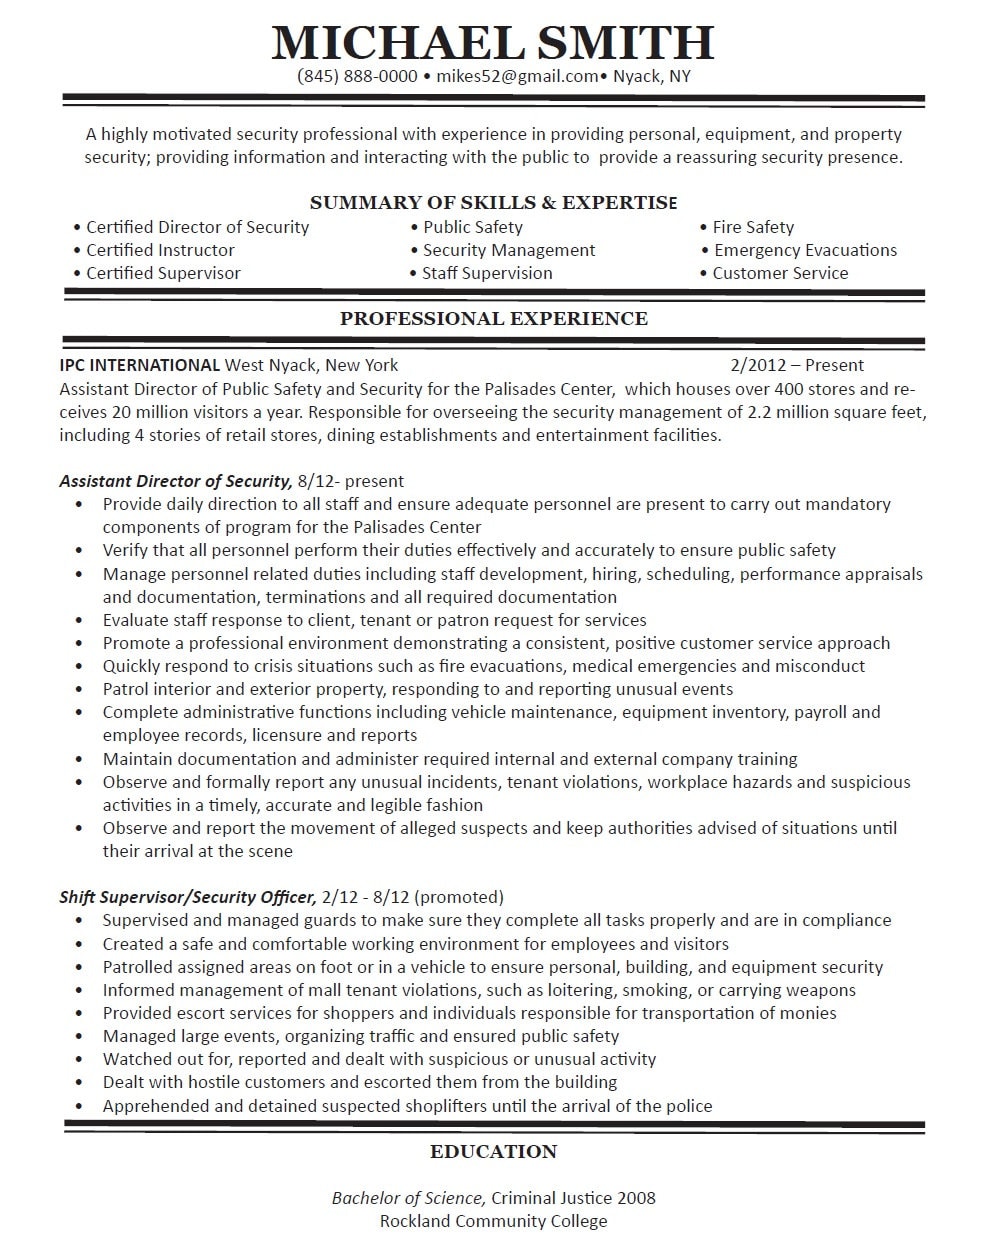 Expert resume writing about com